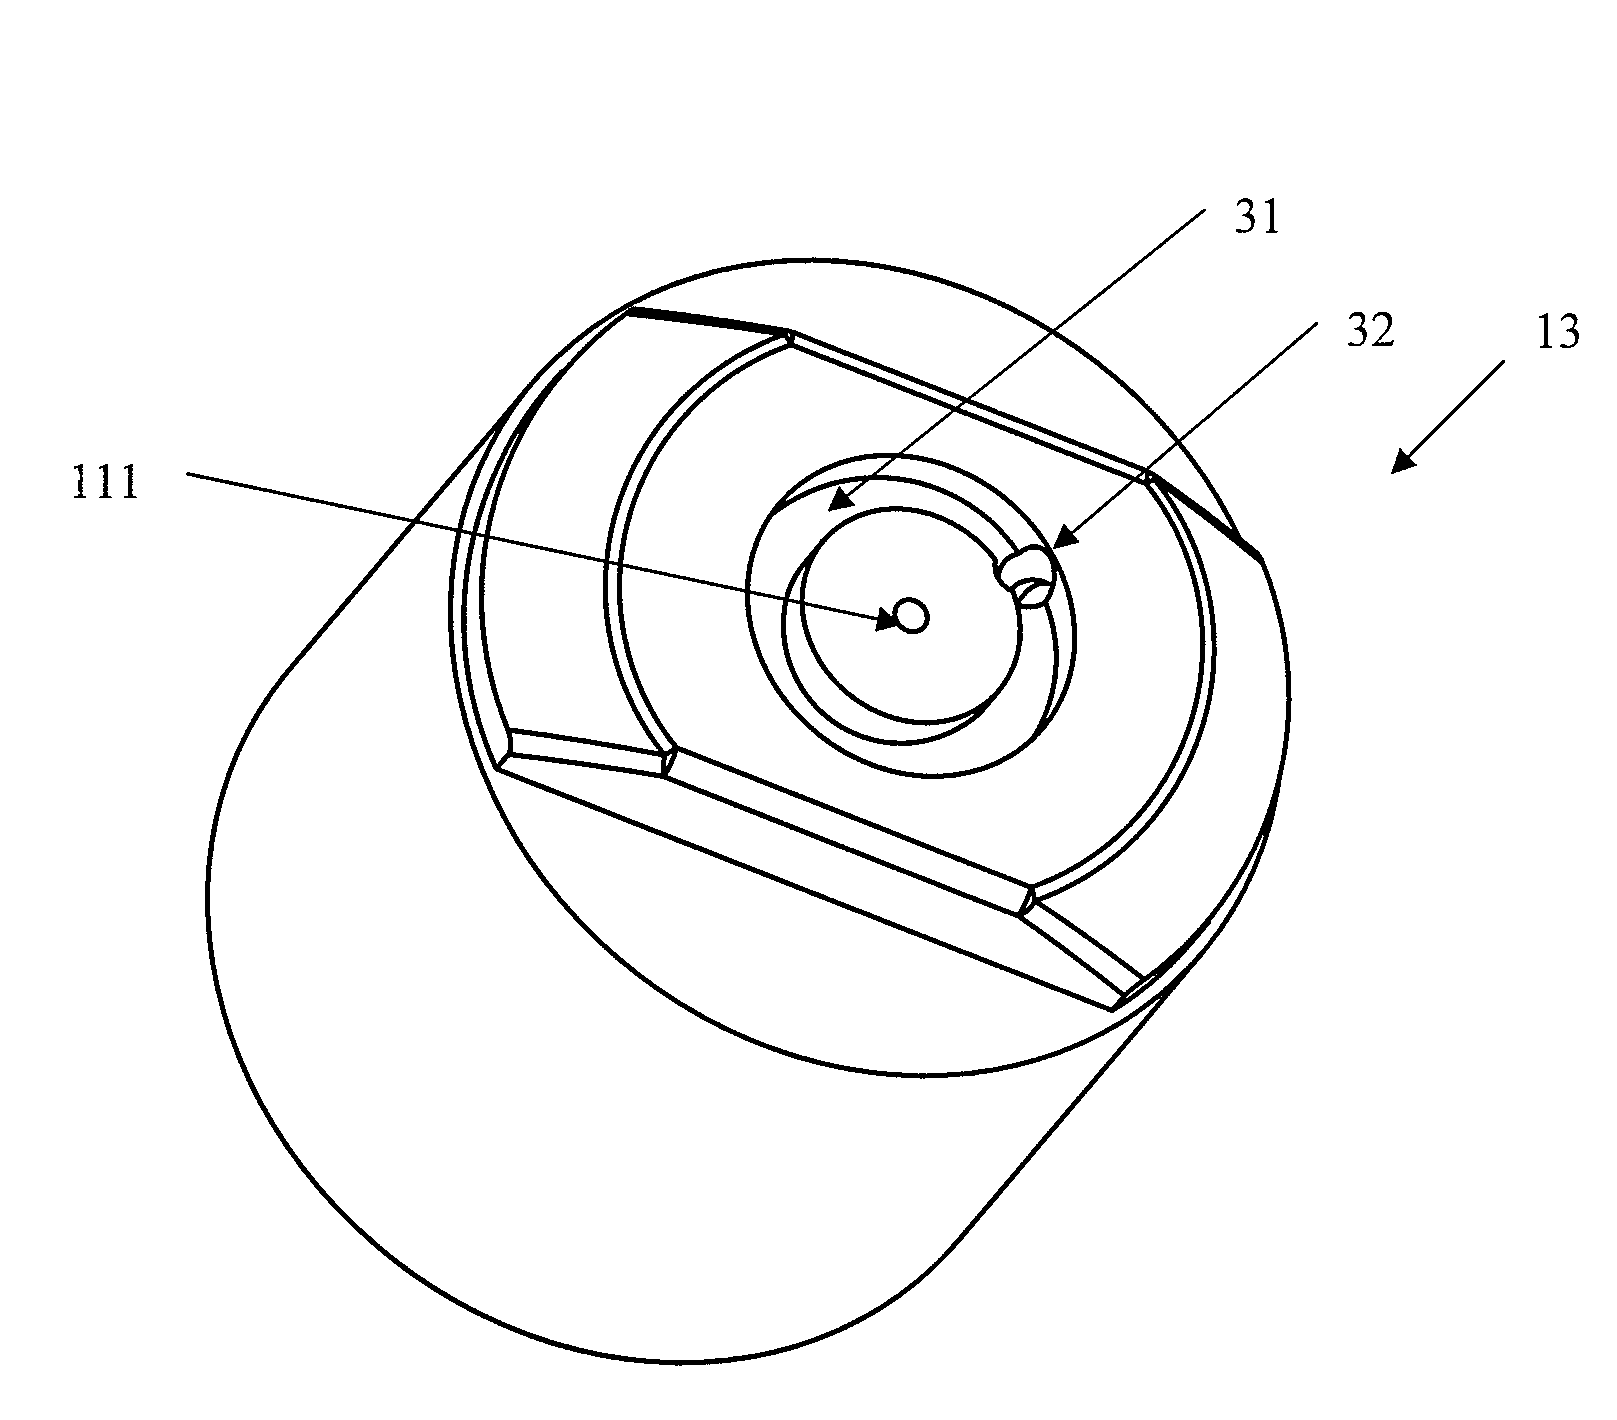 Method and apparatus for coupling a channeled sample probe to tissue